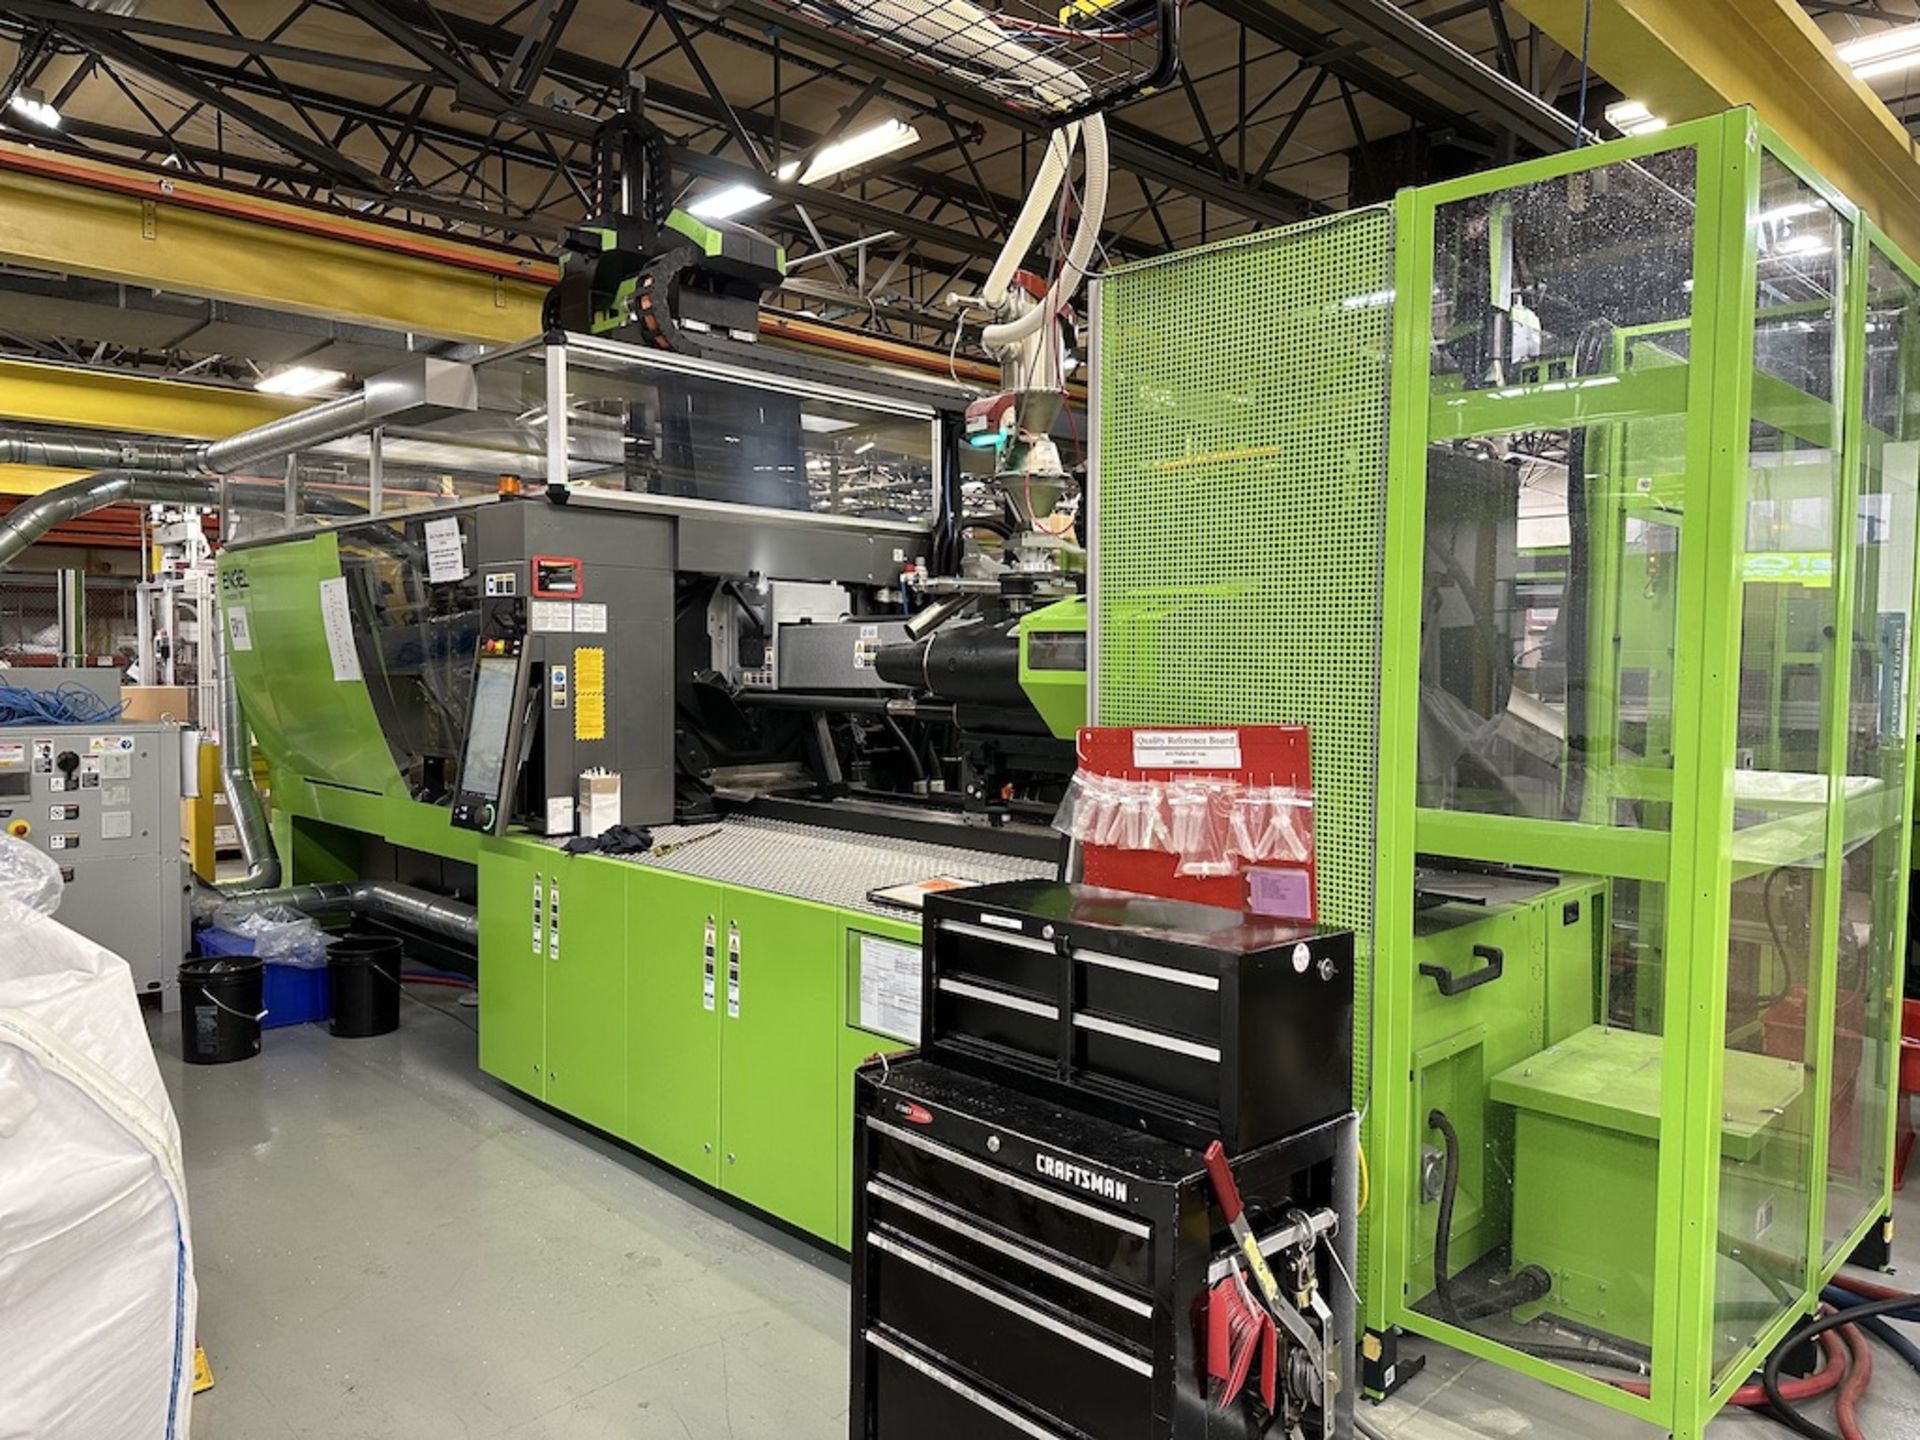 Engel 180 Metric Ton All Injection Molding Press w/Engel Robot, New in 2020